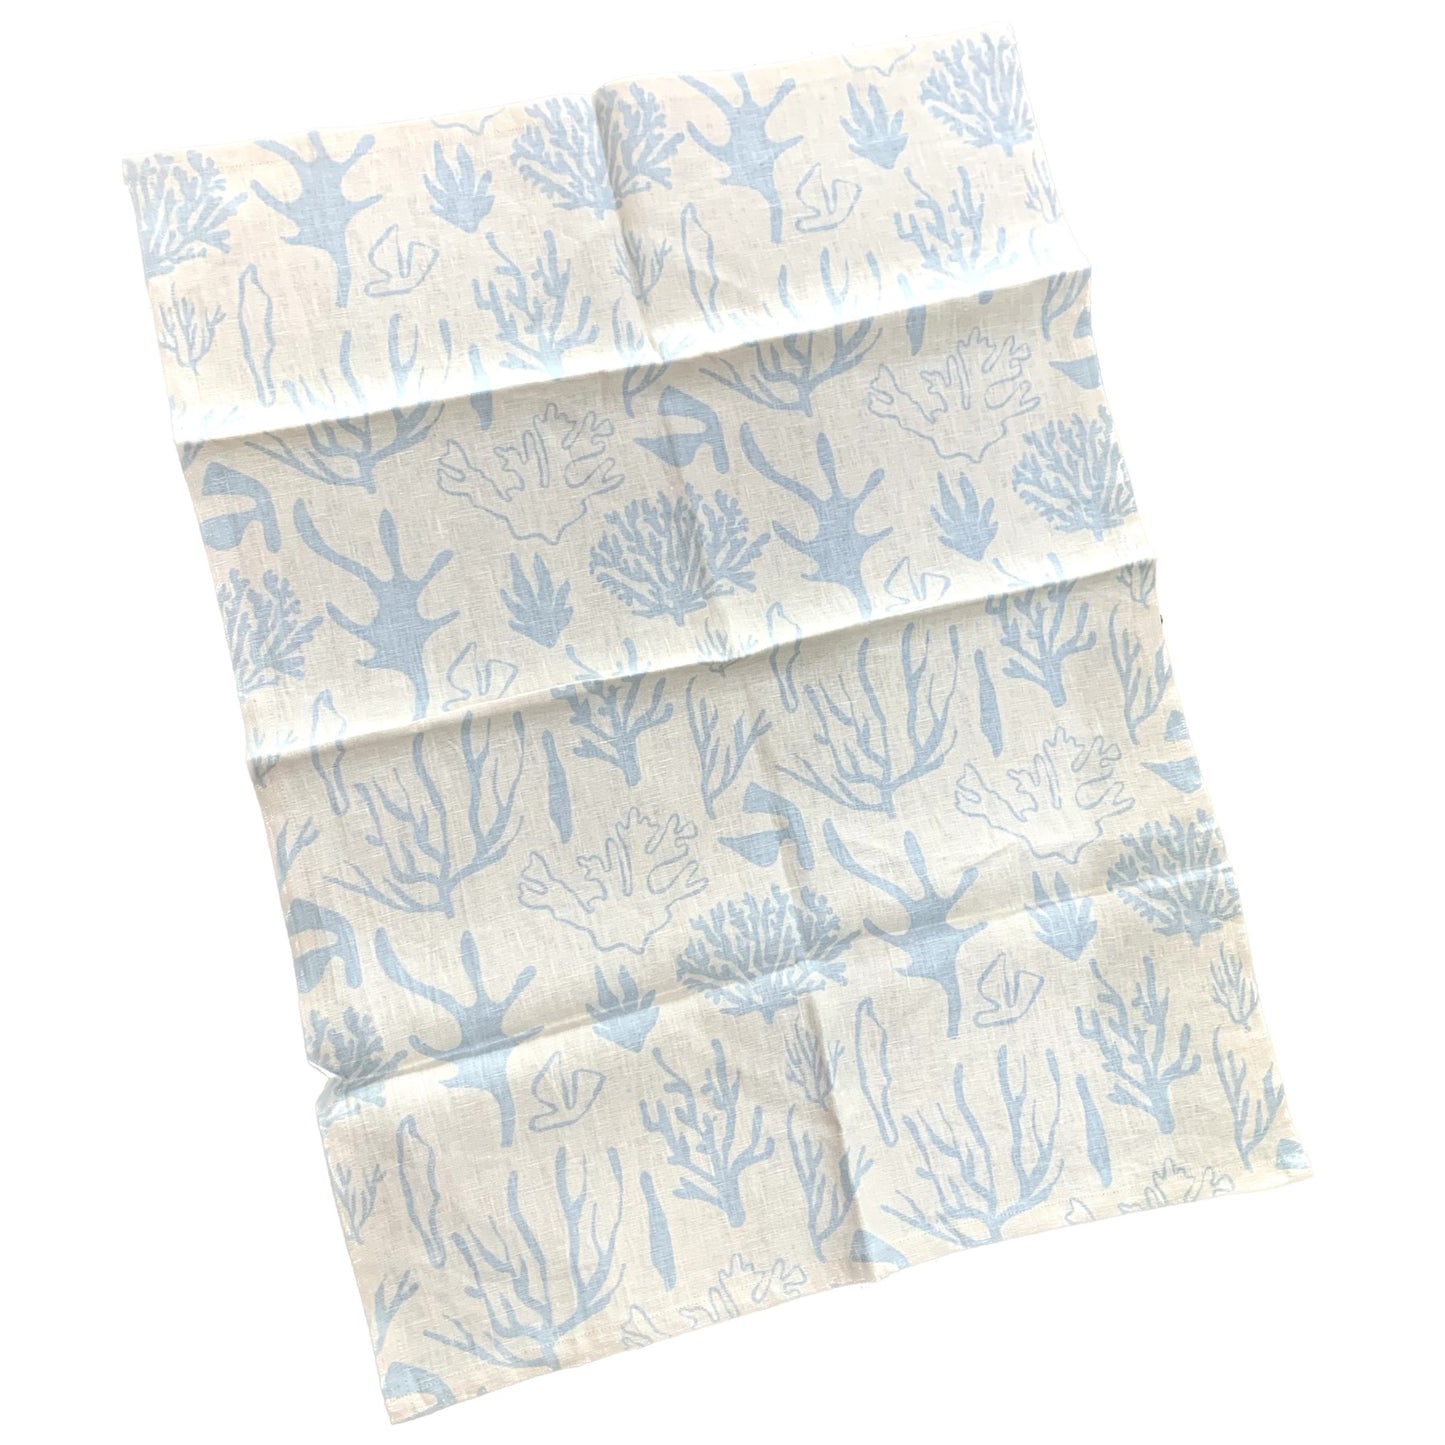 BRIGHT THREADS- The Coral Sea Tea Towel - CHAMBRAY